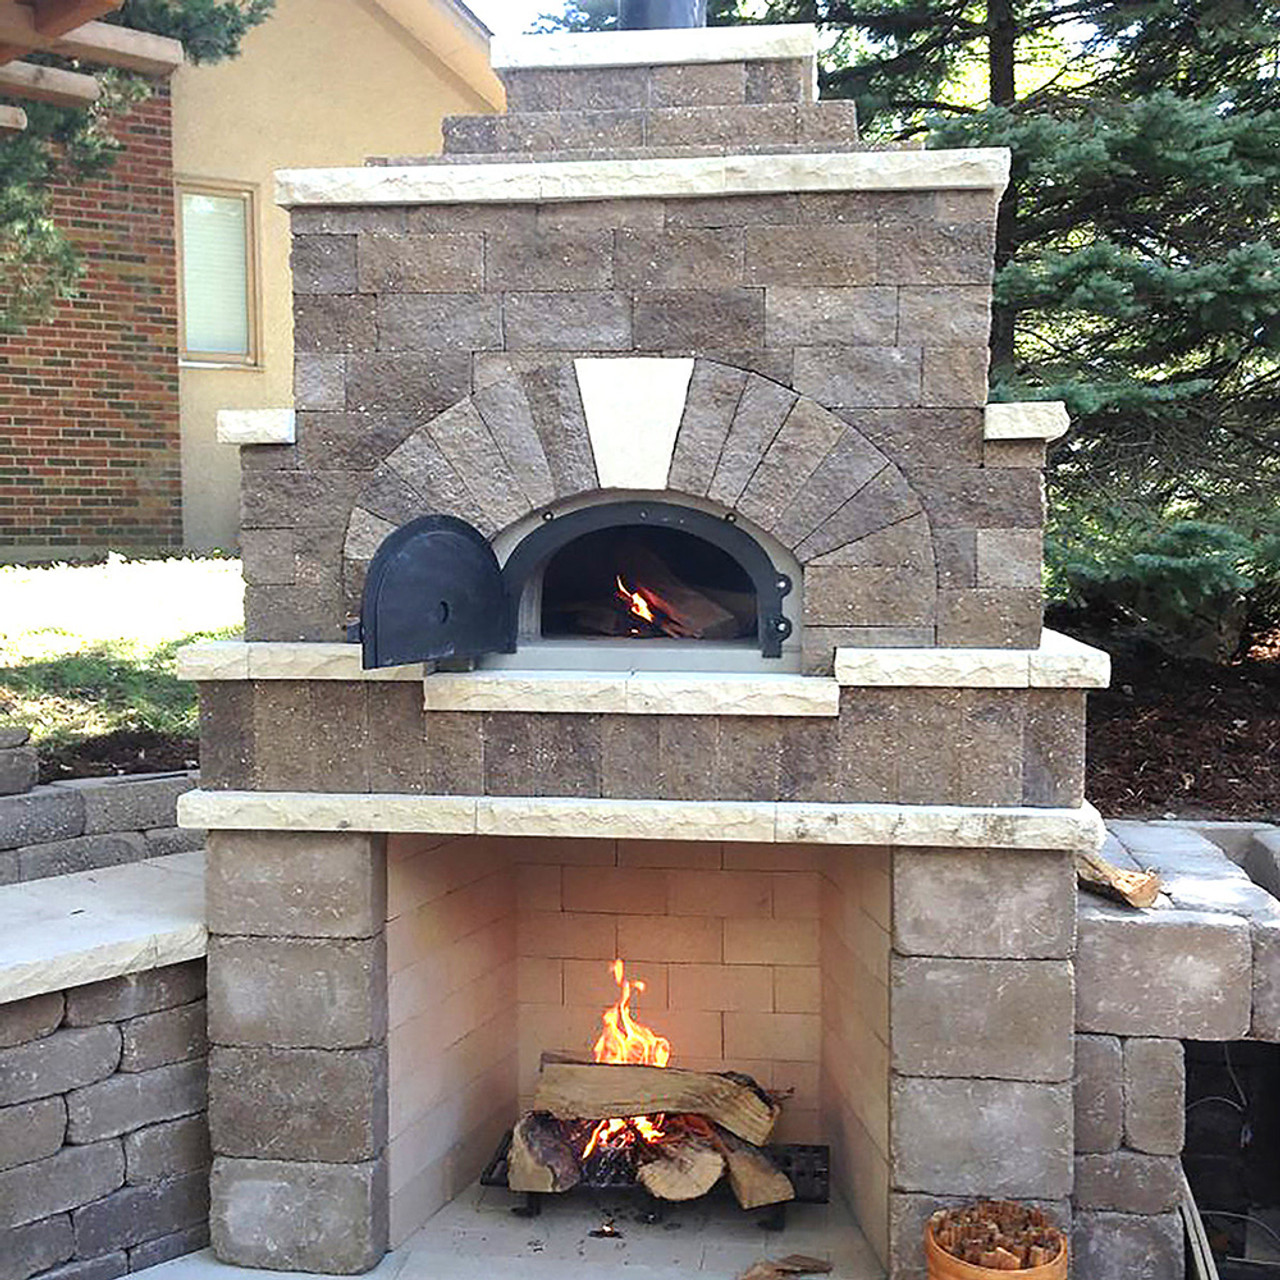 https://cdn11.bigcommerce.com/s-d9g0oj0zhx/images/stencil/1280x1280/products/52069/264473/cbo-500-diy-kit-wood-fired-pizza-oven-flexibility-meets-affordability-27-x-22-cooking-surface-1__79564.1669294661.jpg?c=2?imbypass=on